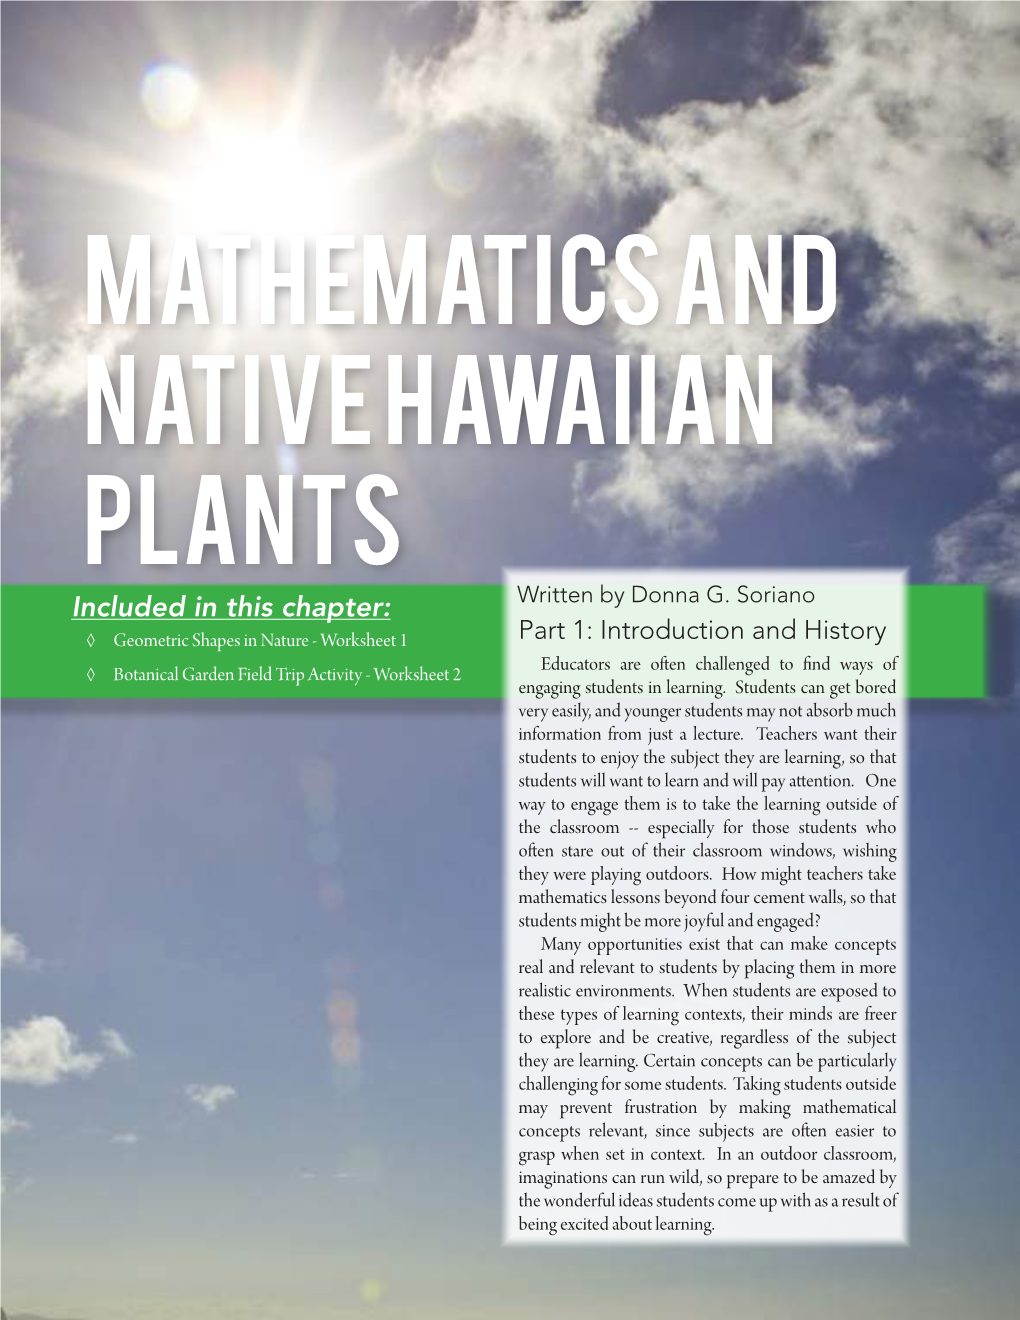 Mathematics and Native Hawaiian Plants Included in This Chapter: Written by Donna G